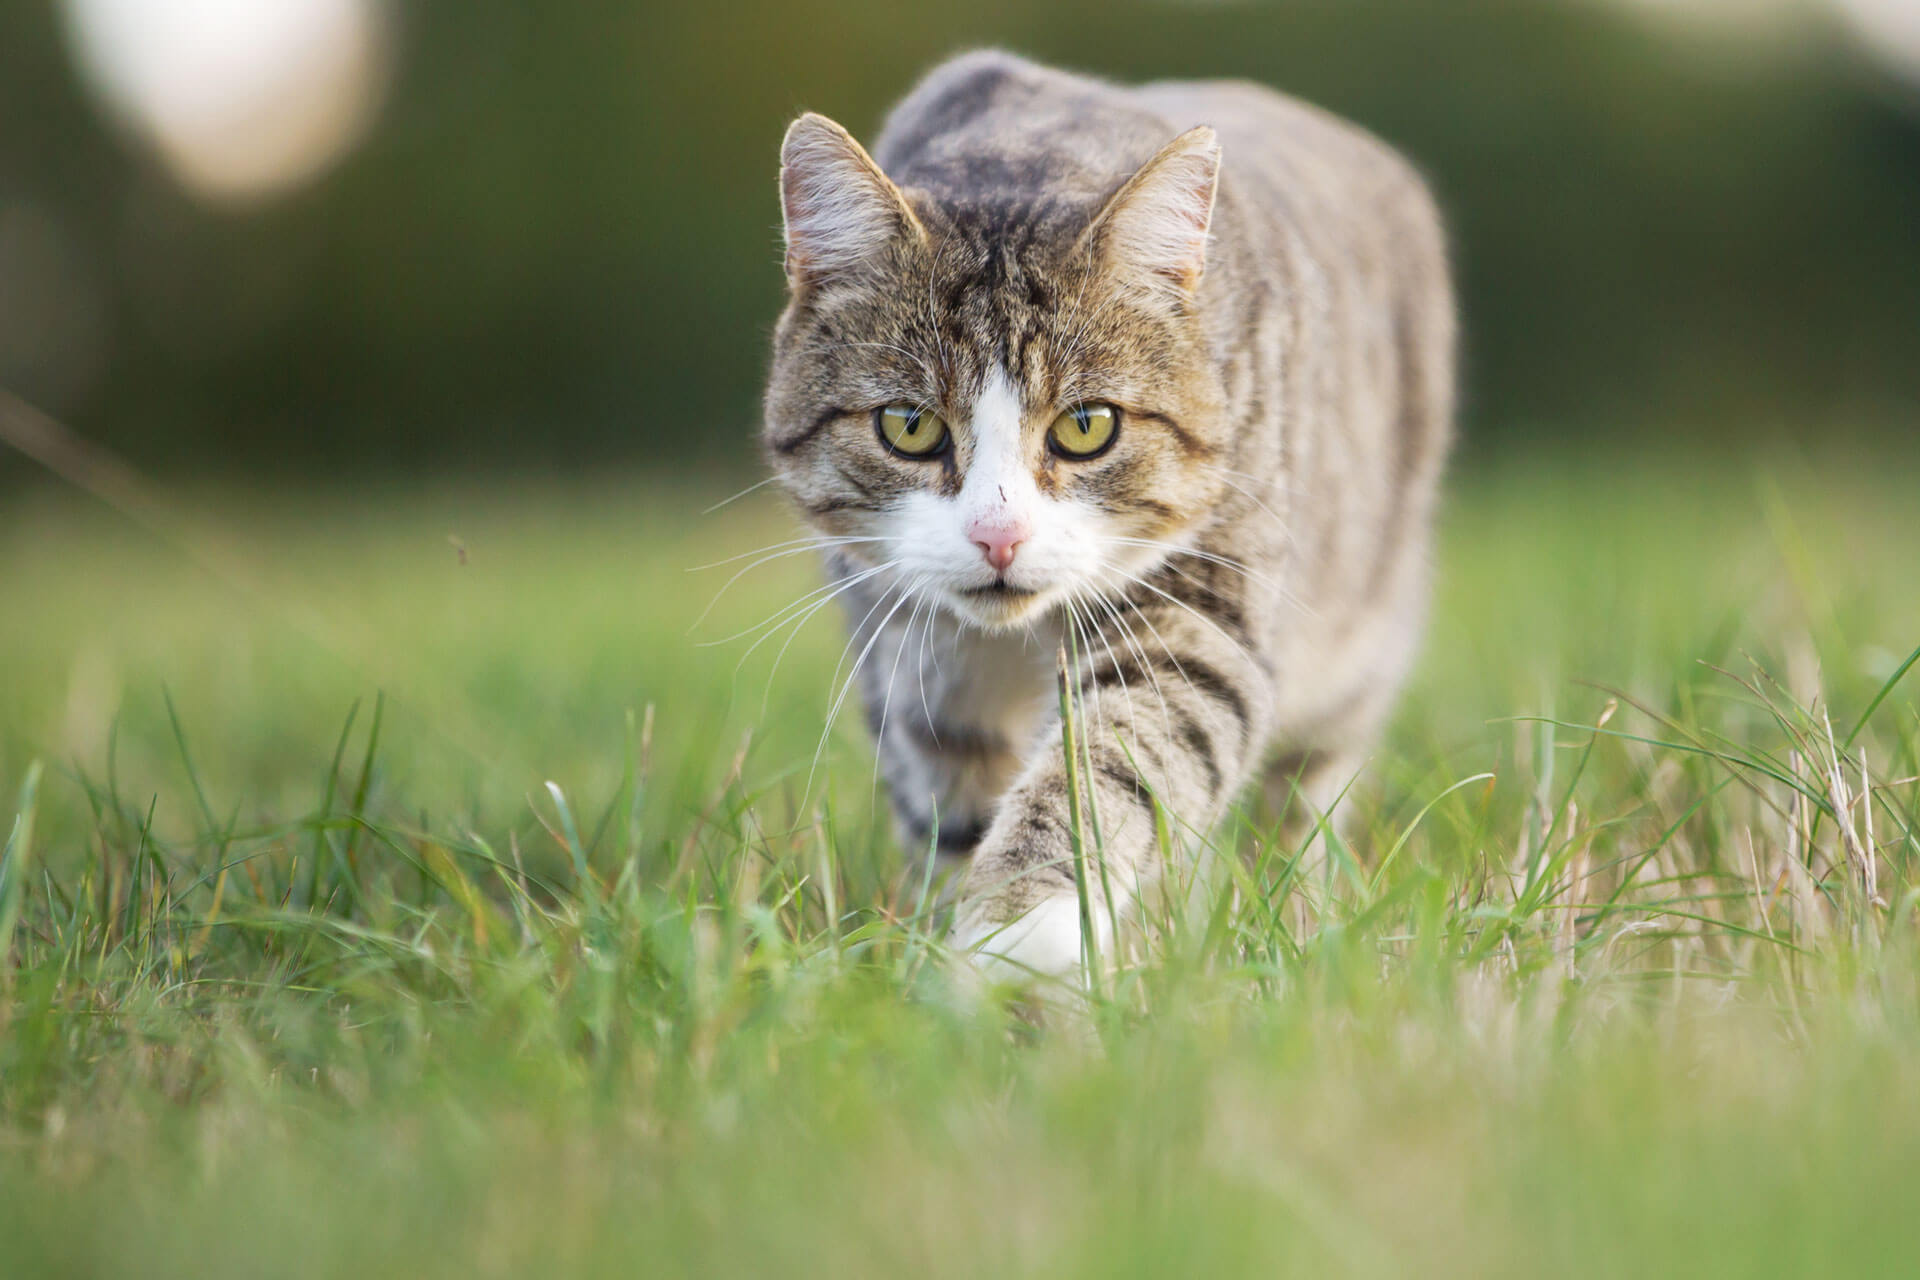 Cat Territory Size And Range: How Far Does Your Cat Roam?